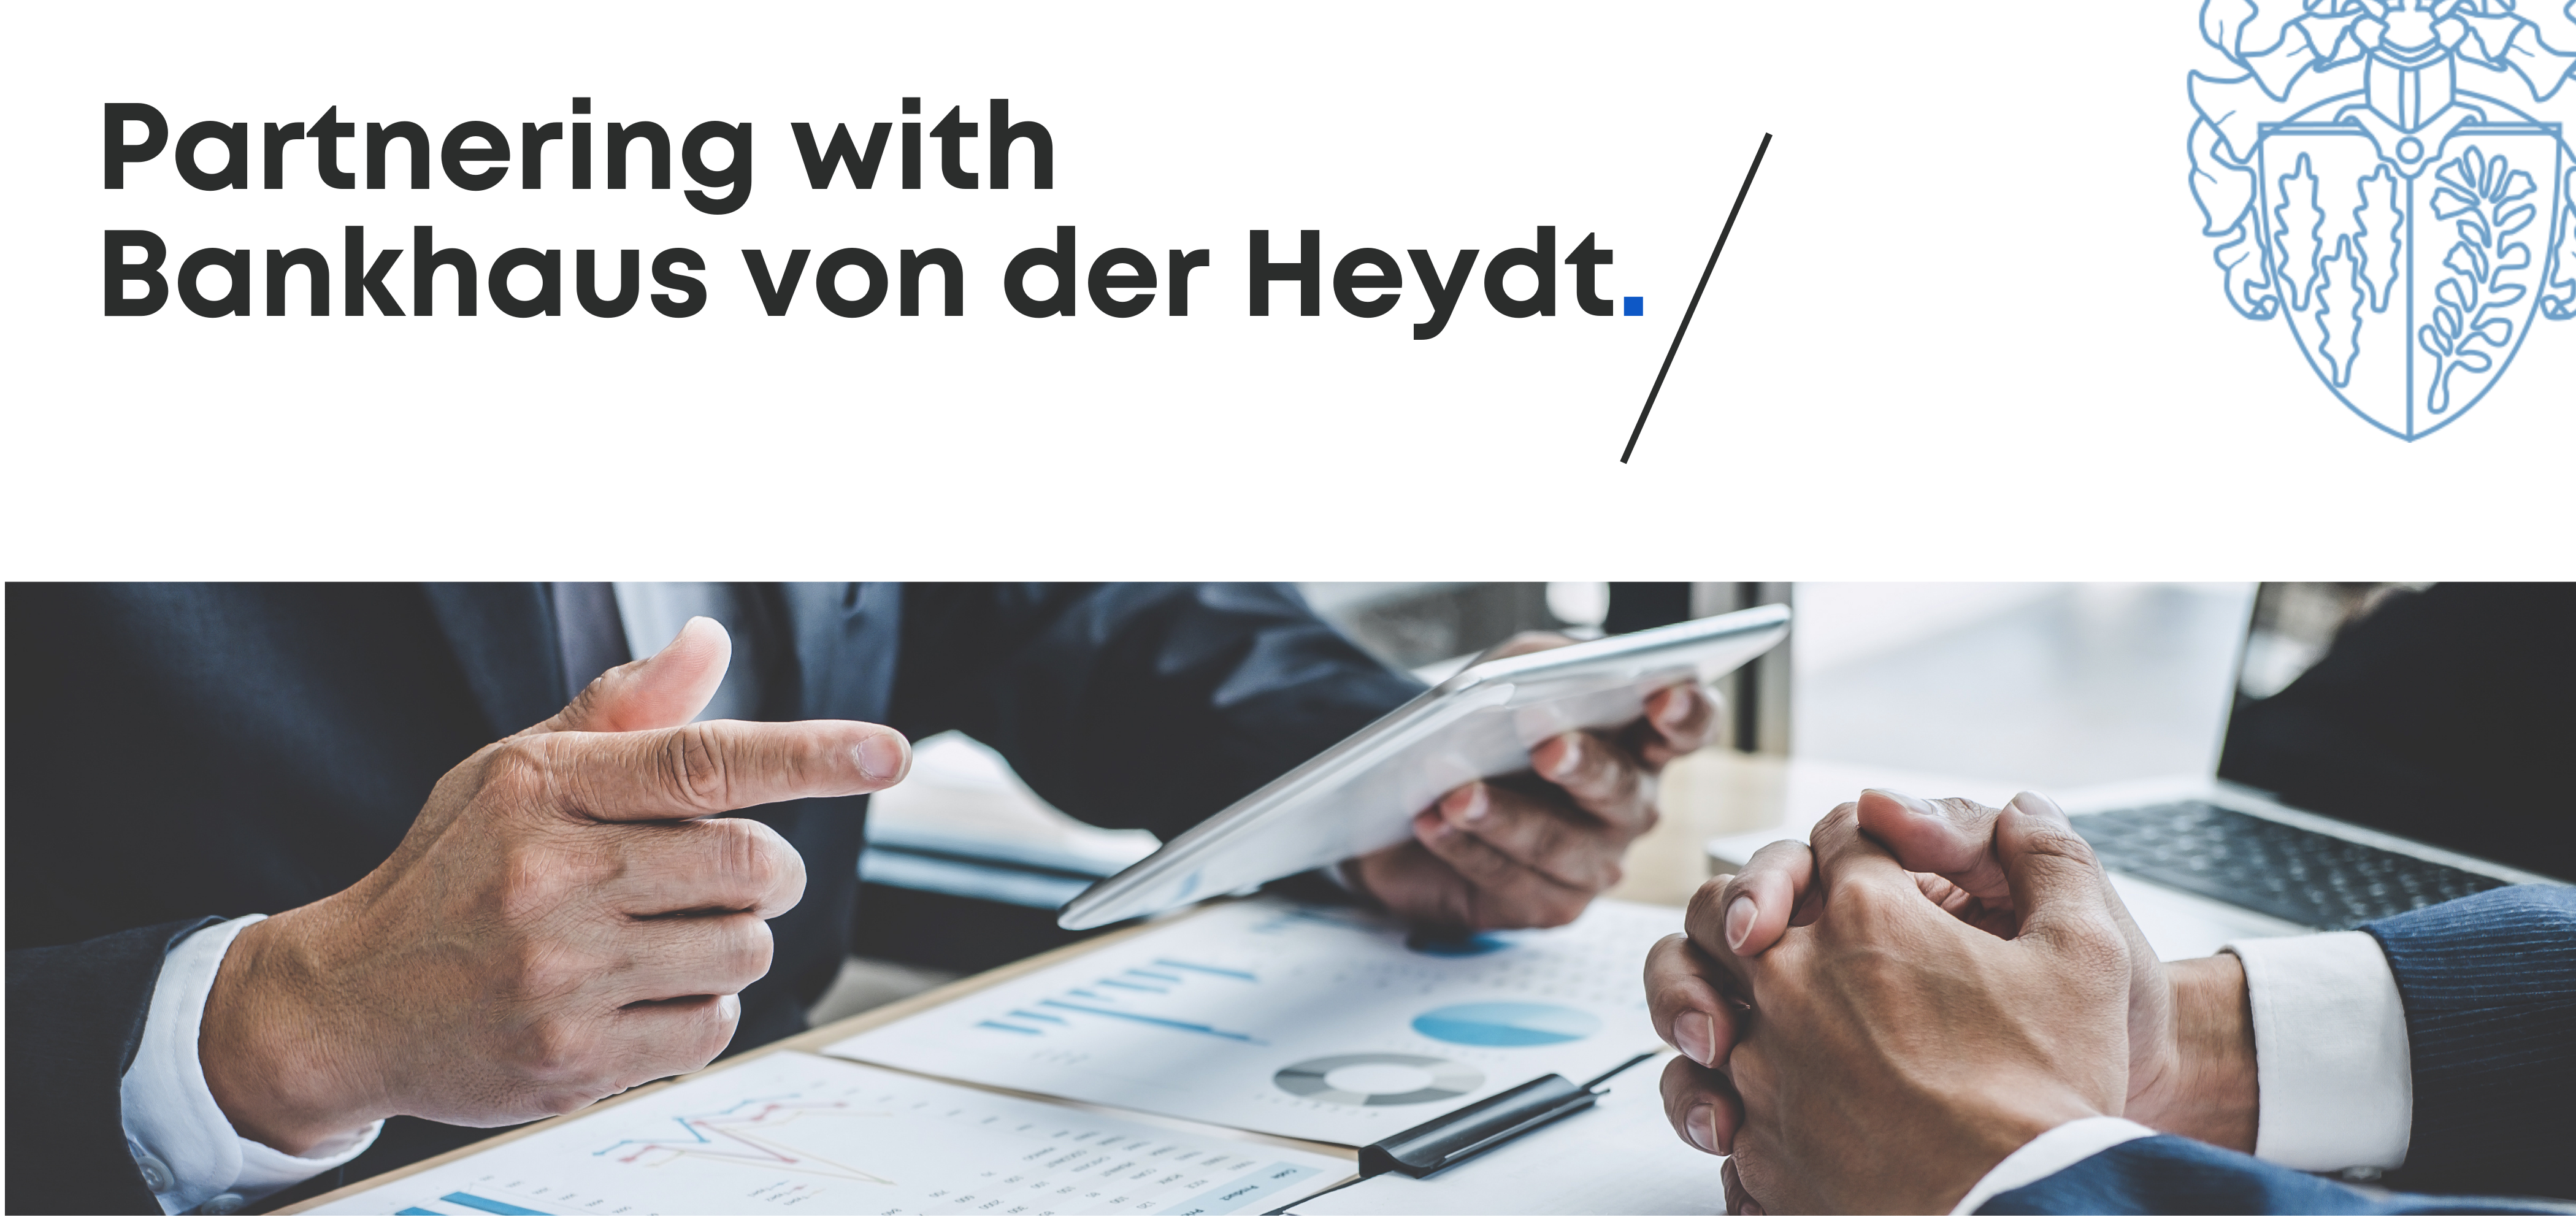 DTransfer partners with Bankhaus von der Heydt on new Euro stablecoin